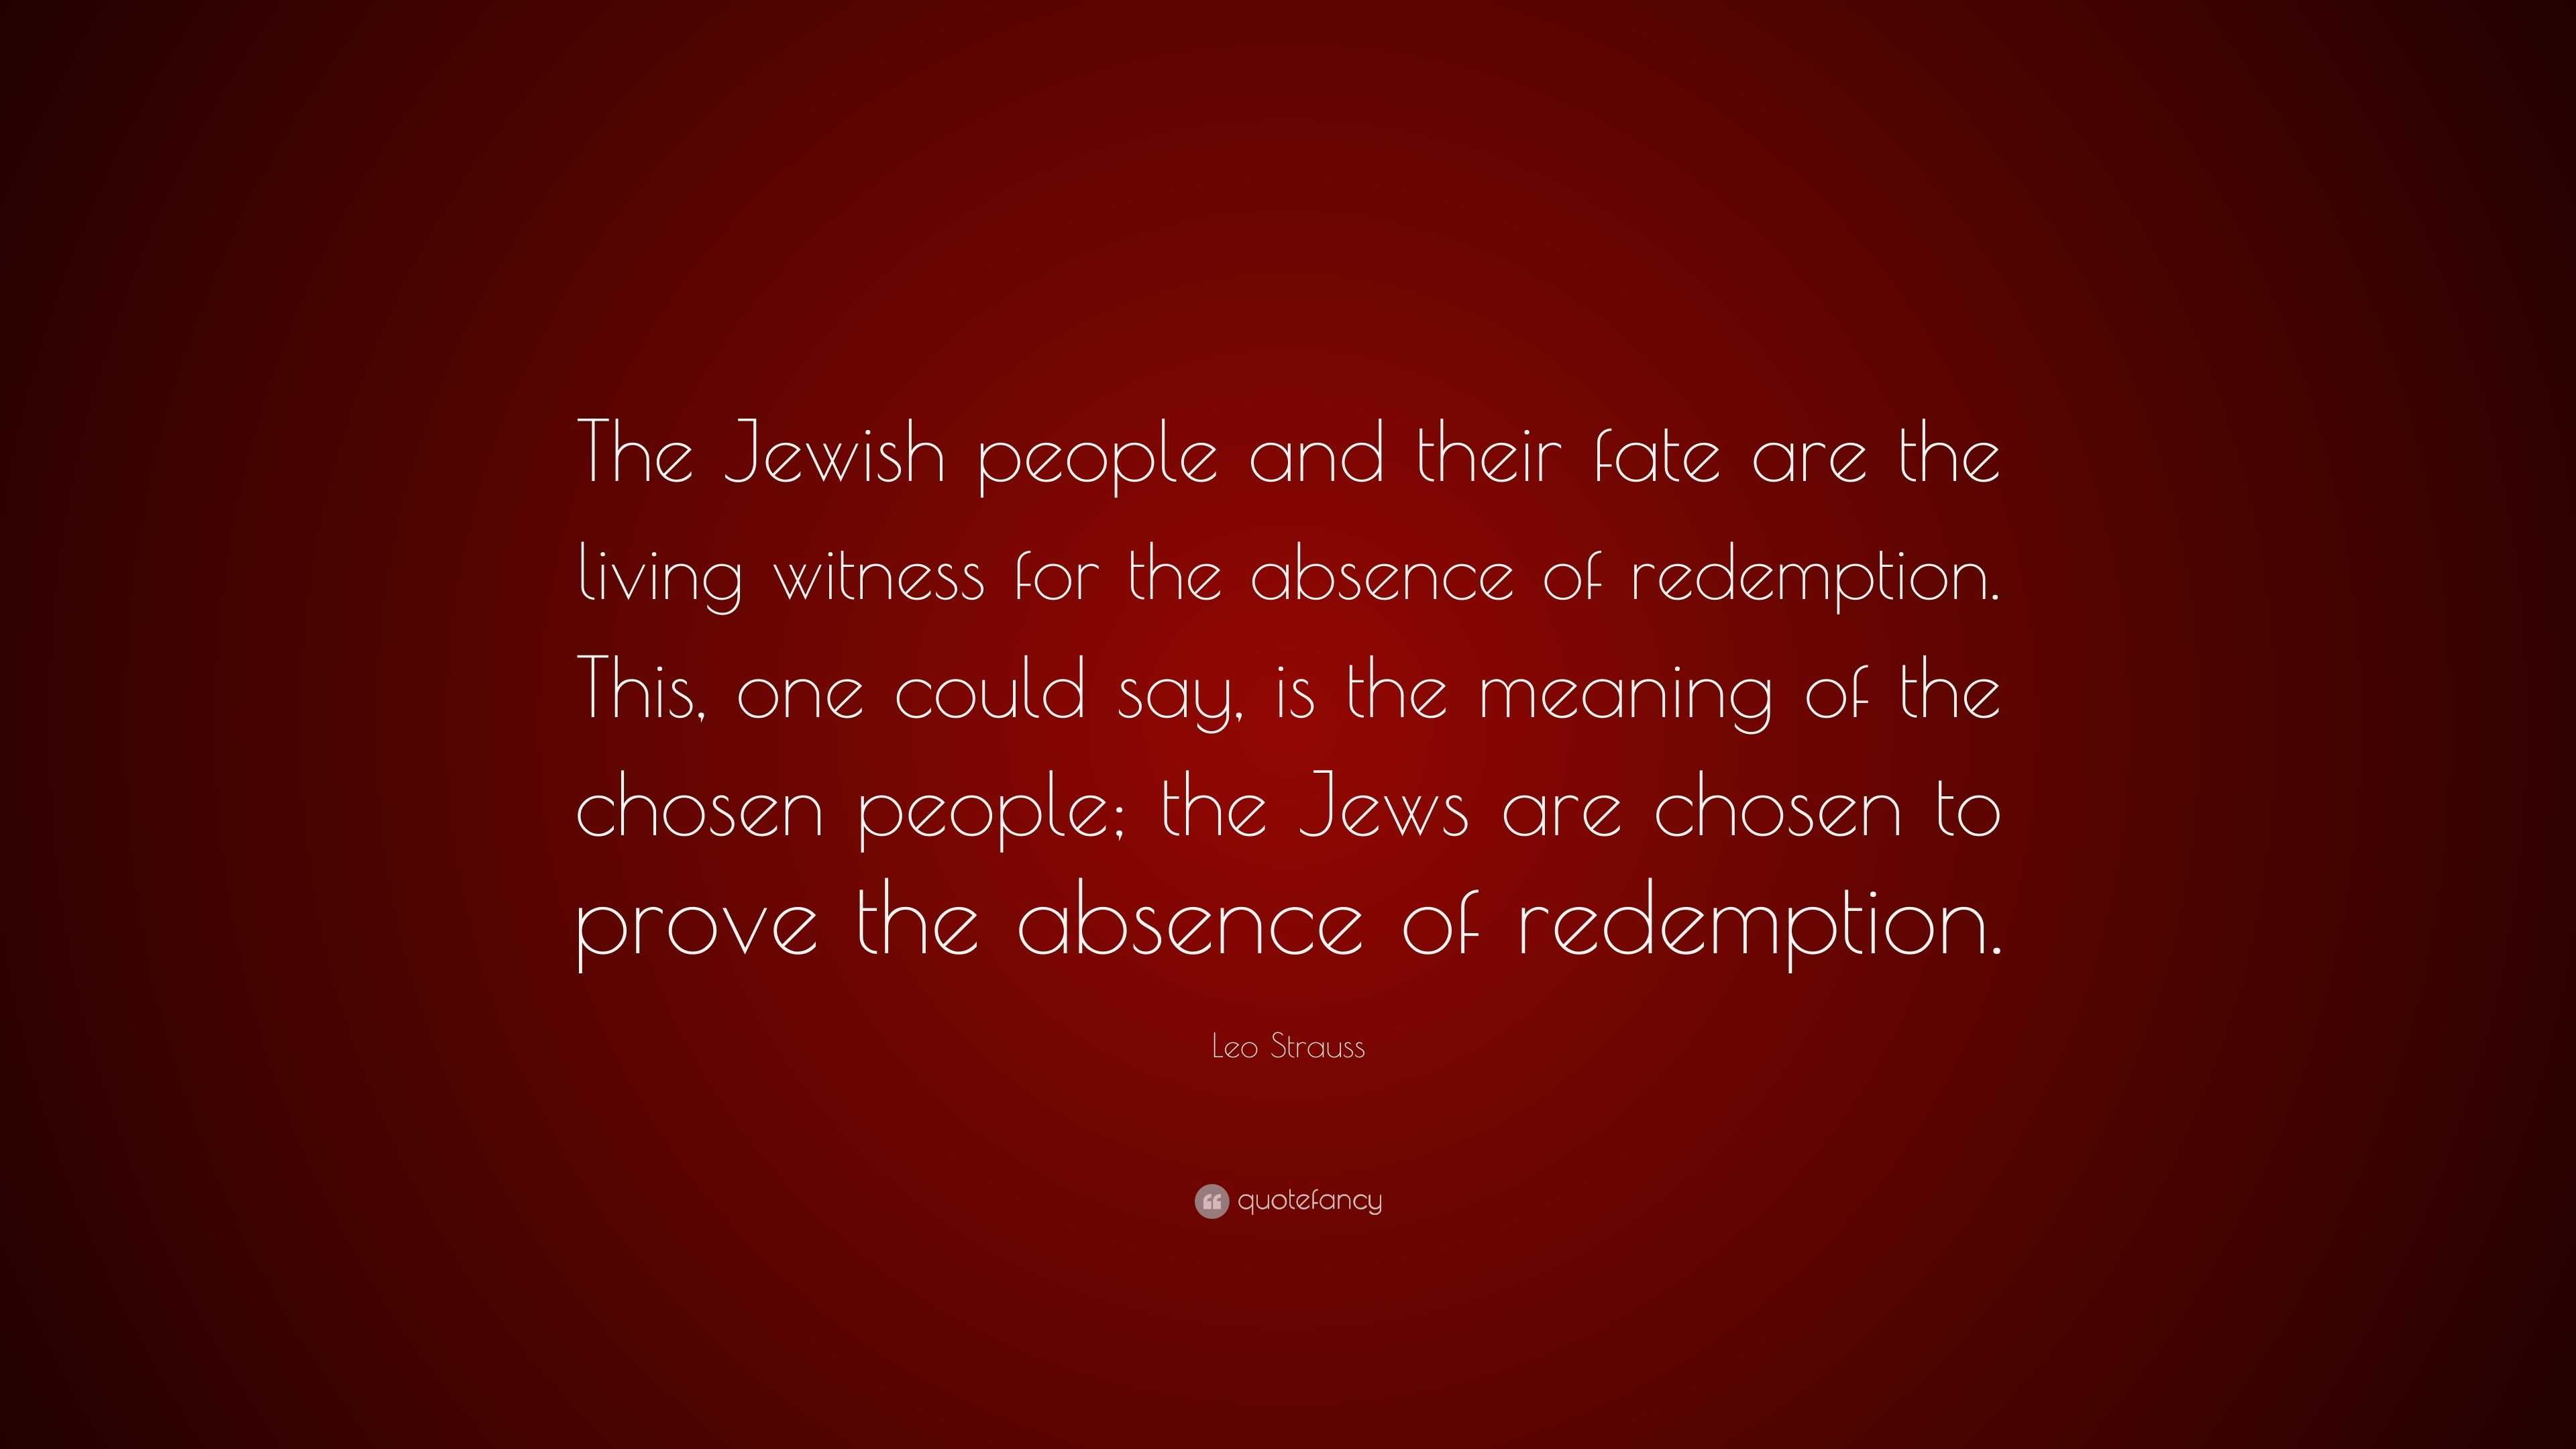 Leo Strauss Quote: “The Jewish people and their fate are the living witness  for the absence of redemption. This, one could say, is the meani”